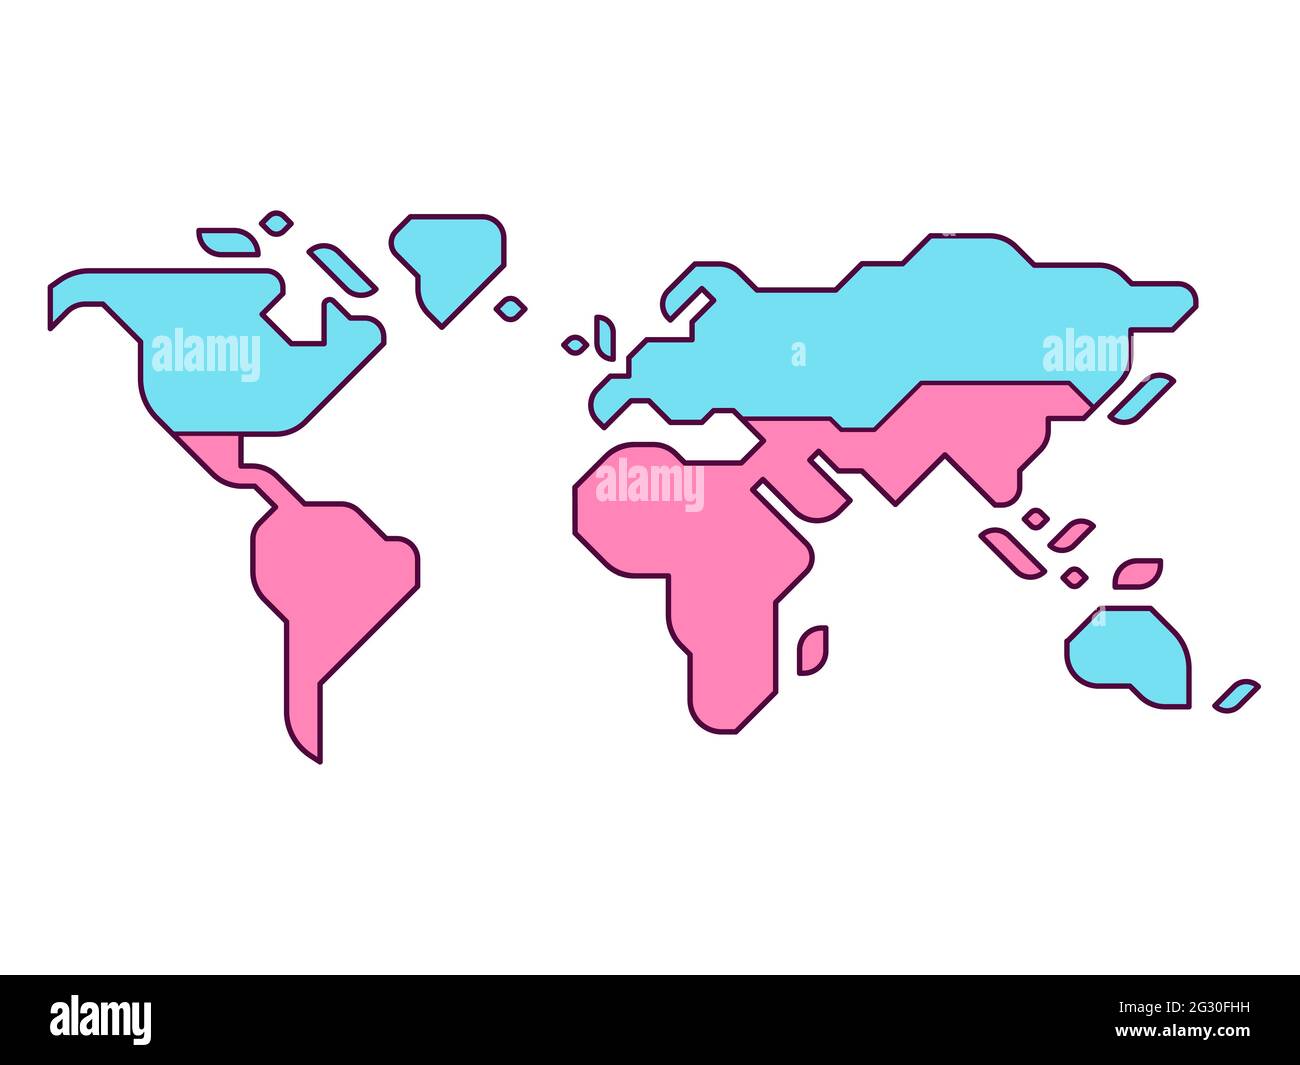 Simplified world map with Global North and Global South divide. Modern flat vector infographic, clip art illustration. Stock Vector